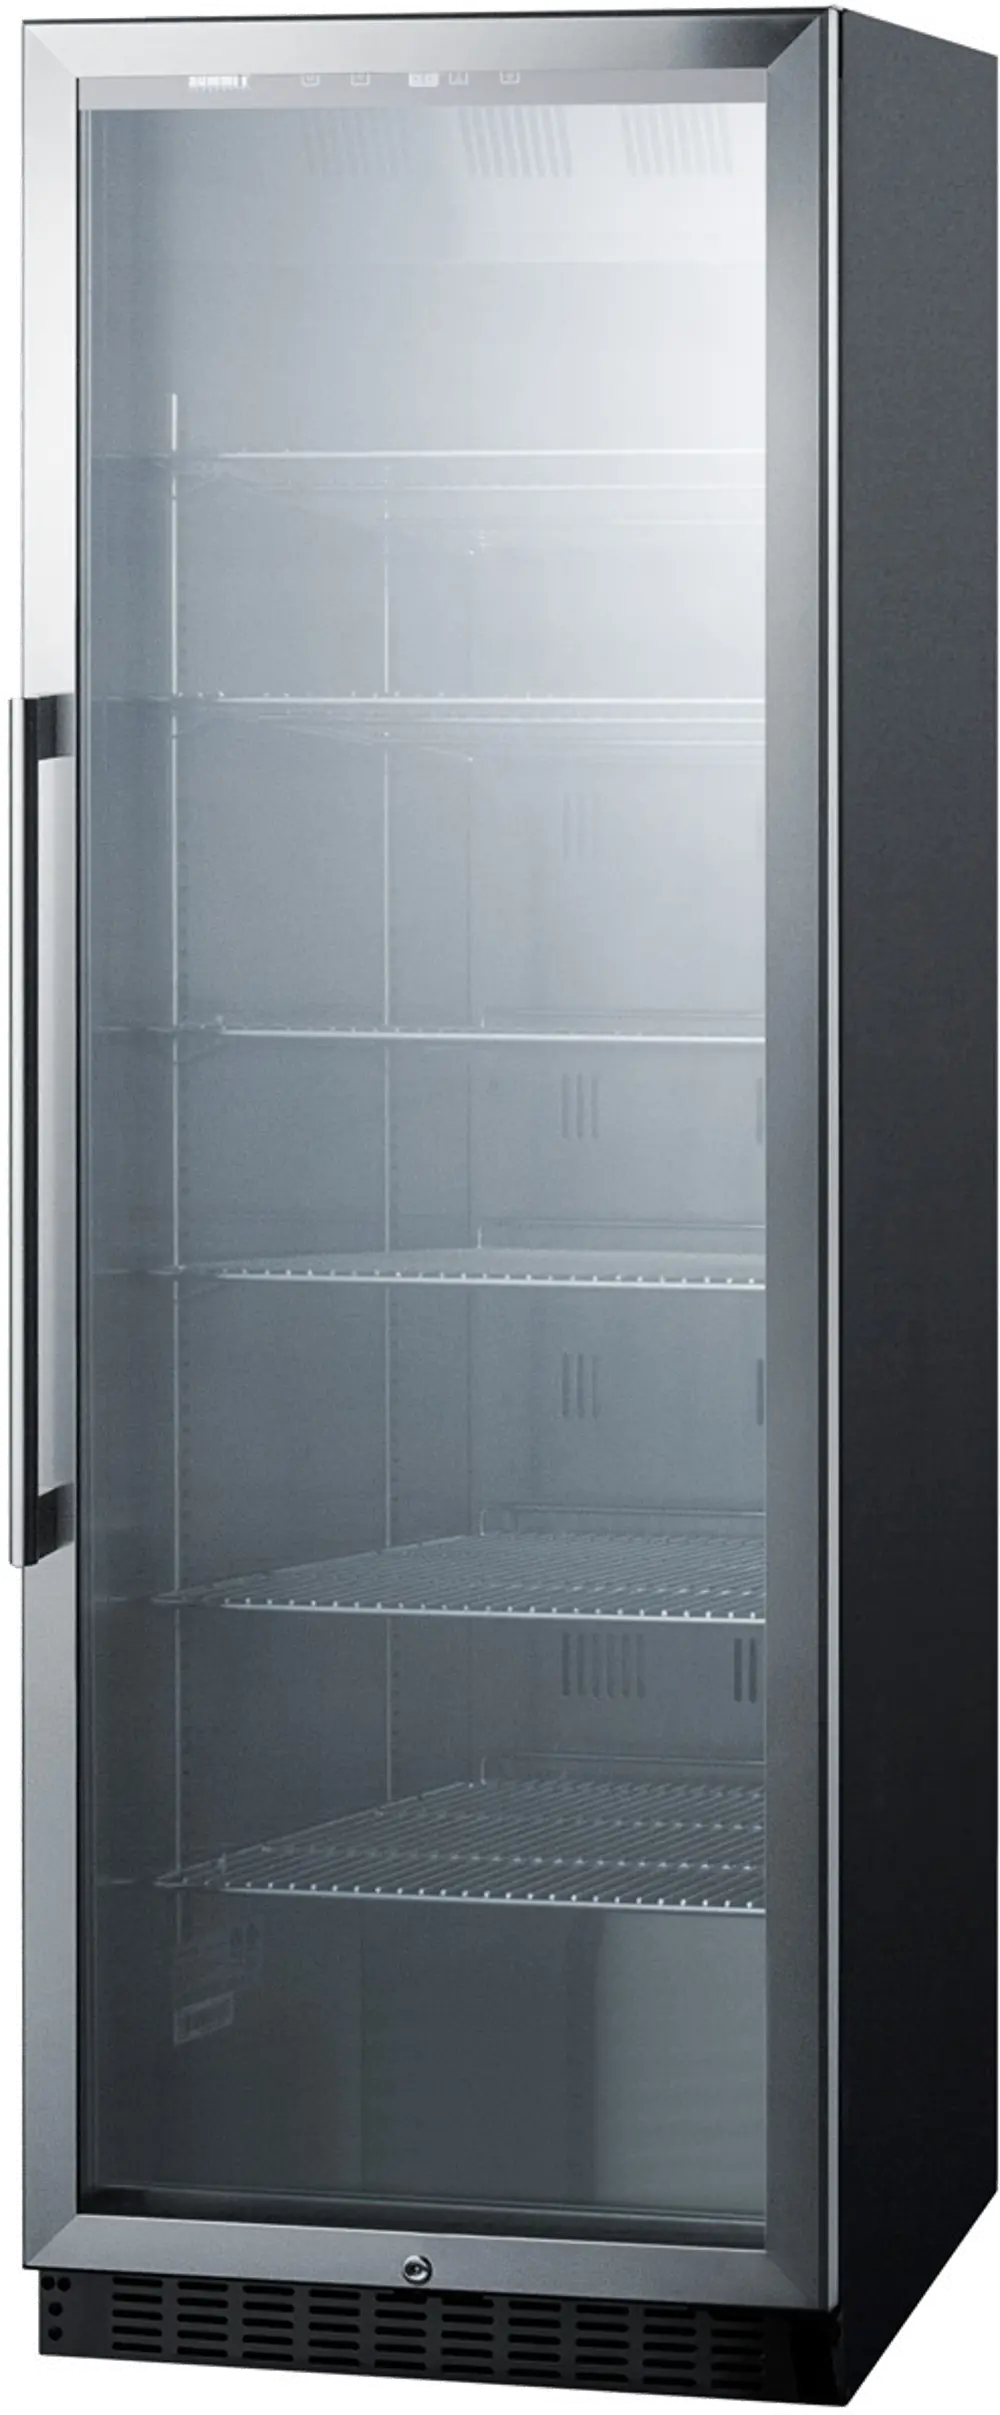 Summit 24 Inch Beverage Center - Stainless Steel and Black-1